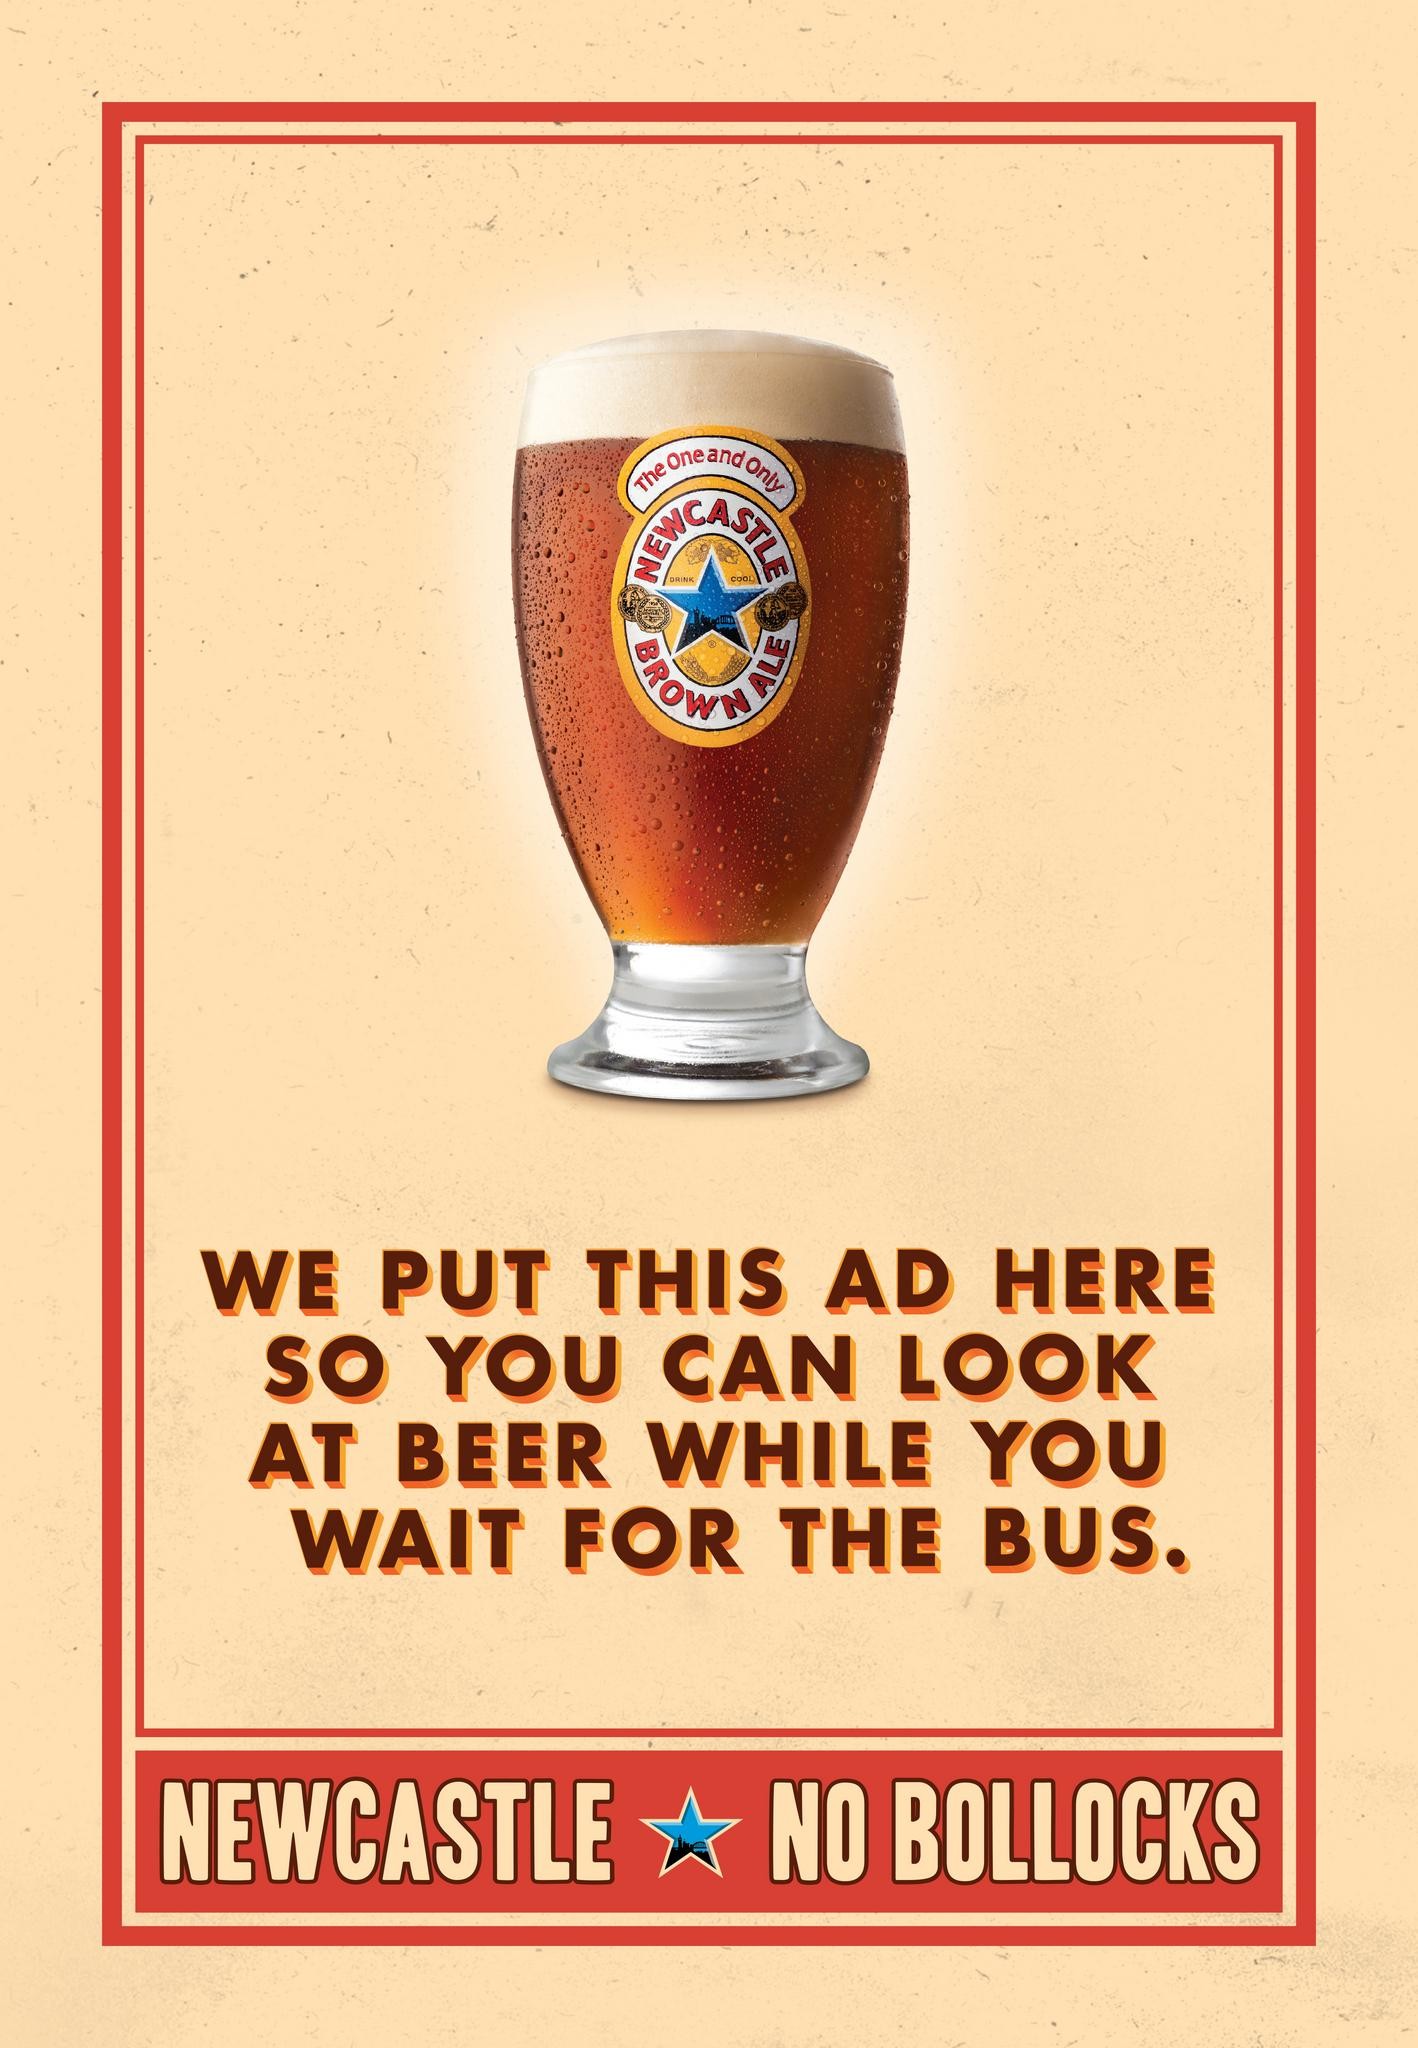 WE PUT THIS AD HERE SO YOU CAN LOOK AT BEER WHILE YOU WAIT FOR THE BUS.